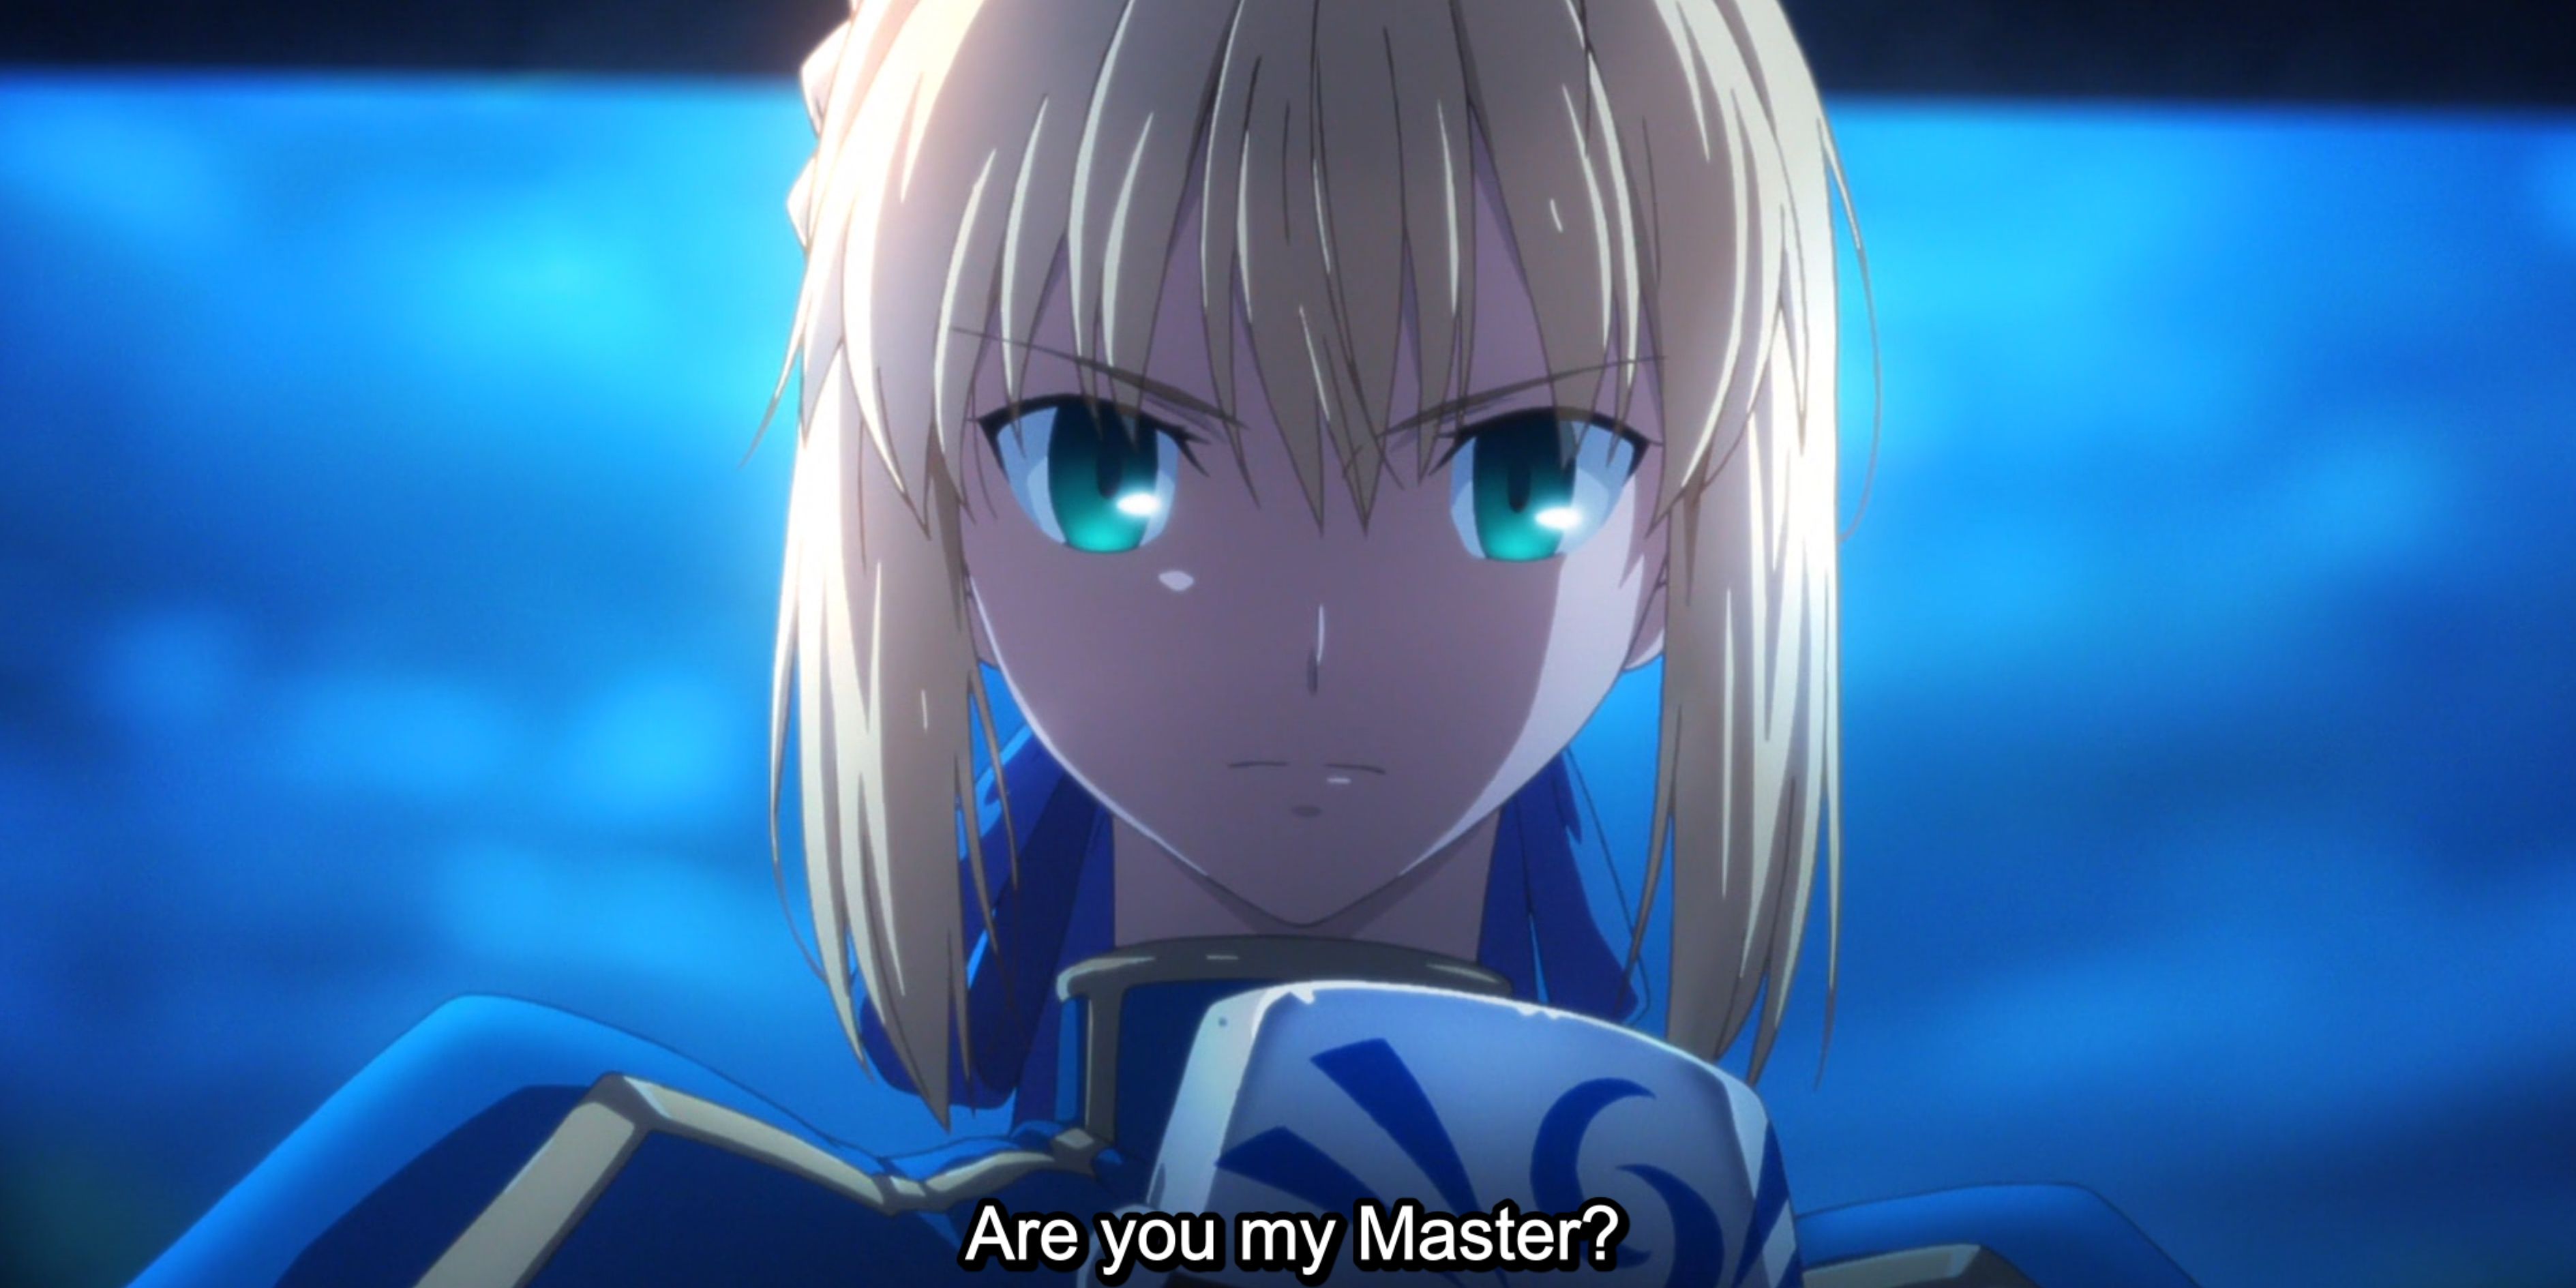 Saber Artortia asking Shirou if he is her Master in the Holy Grail War of Fuyuki in Fate/Stay Night